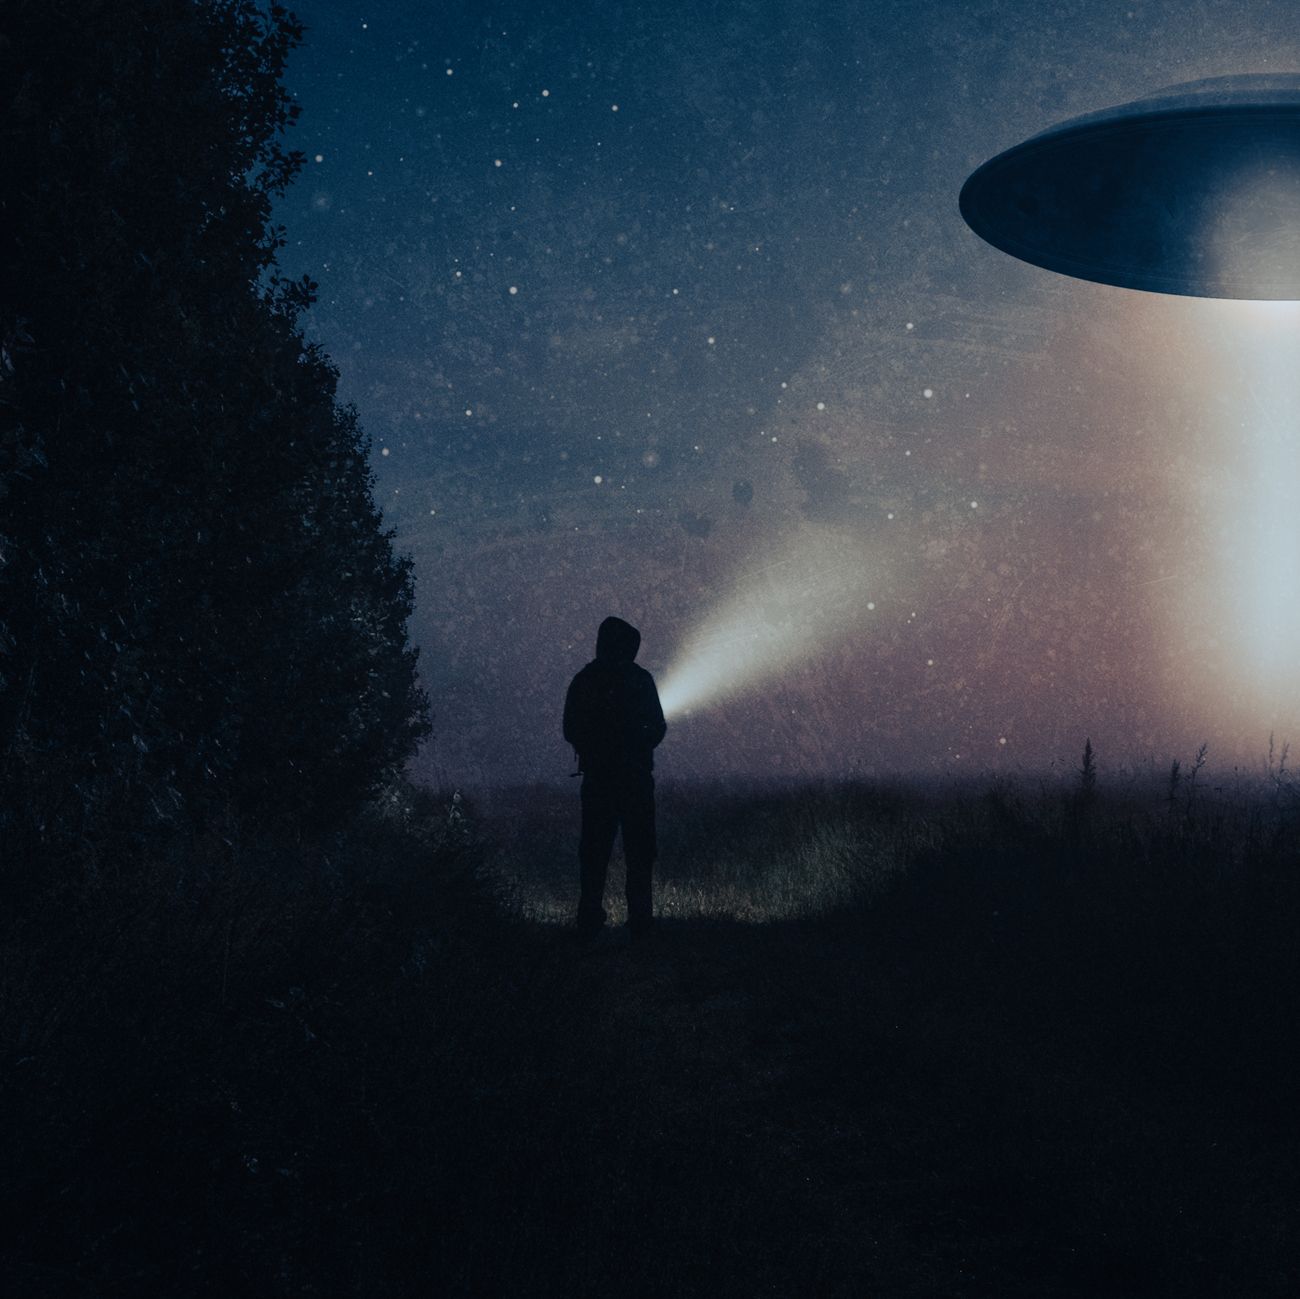 Aliens Are Probably Using Drones and AI to Spy on Us, Stanford Professor Says